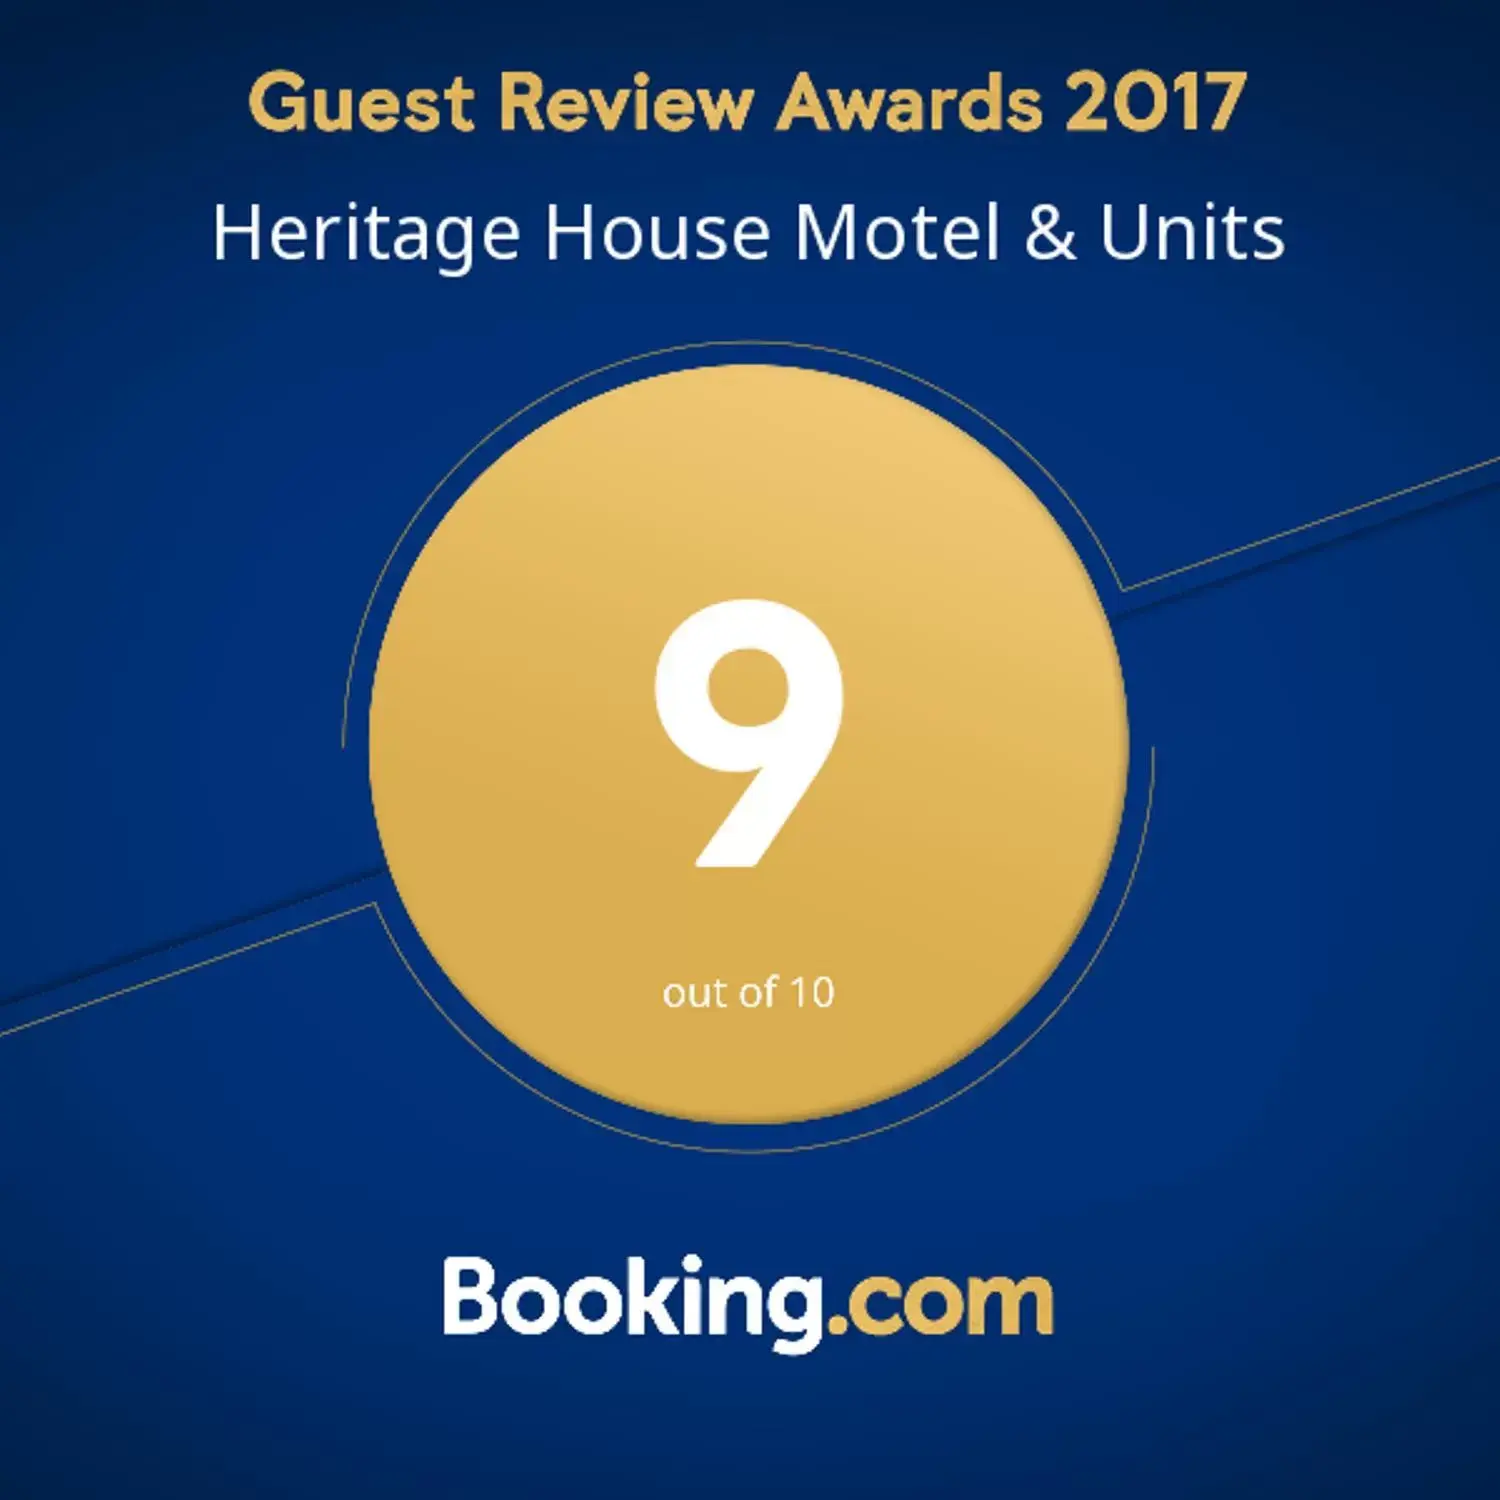 Certificate/Award in Heritage House Motel & Units